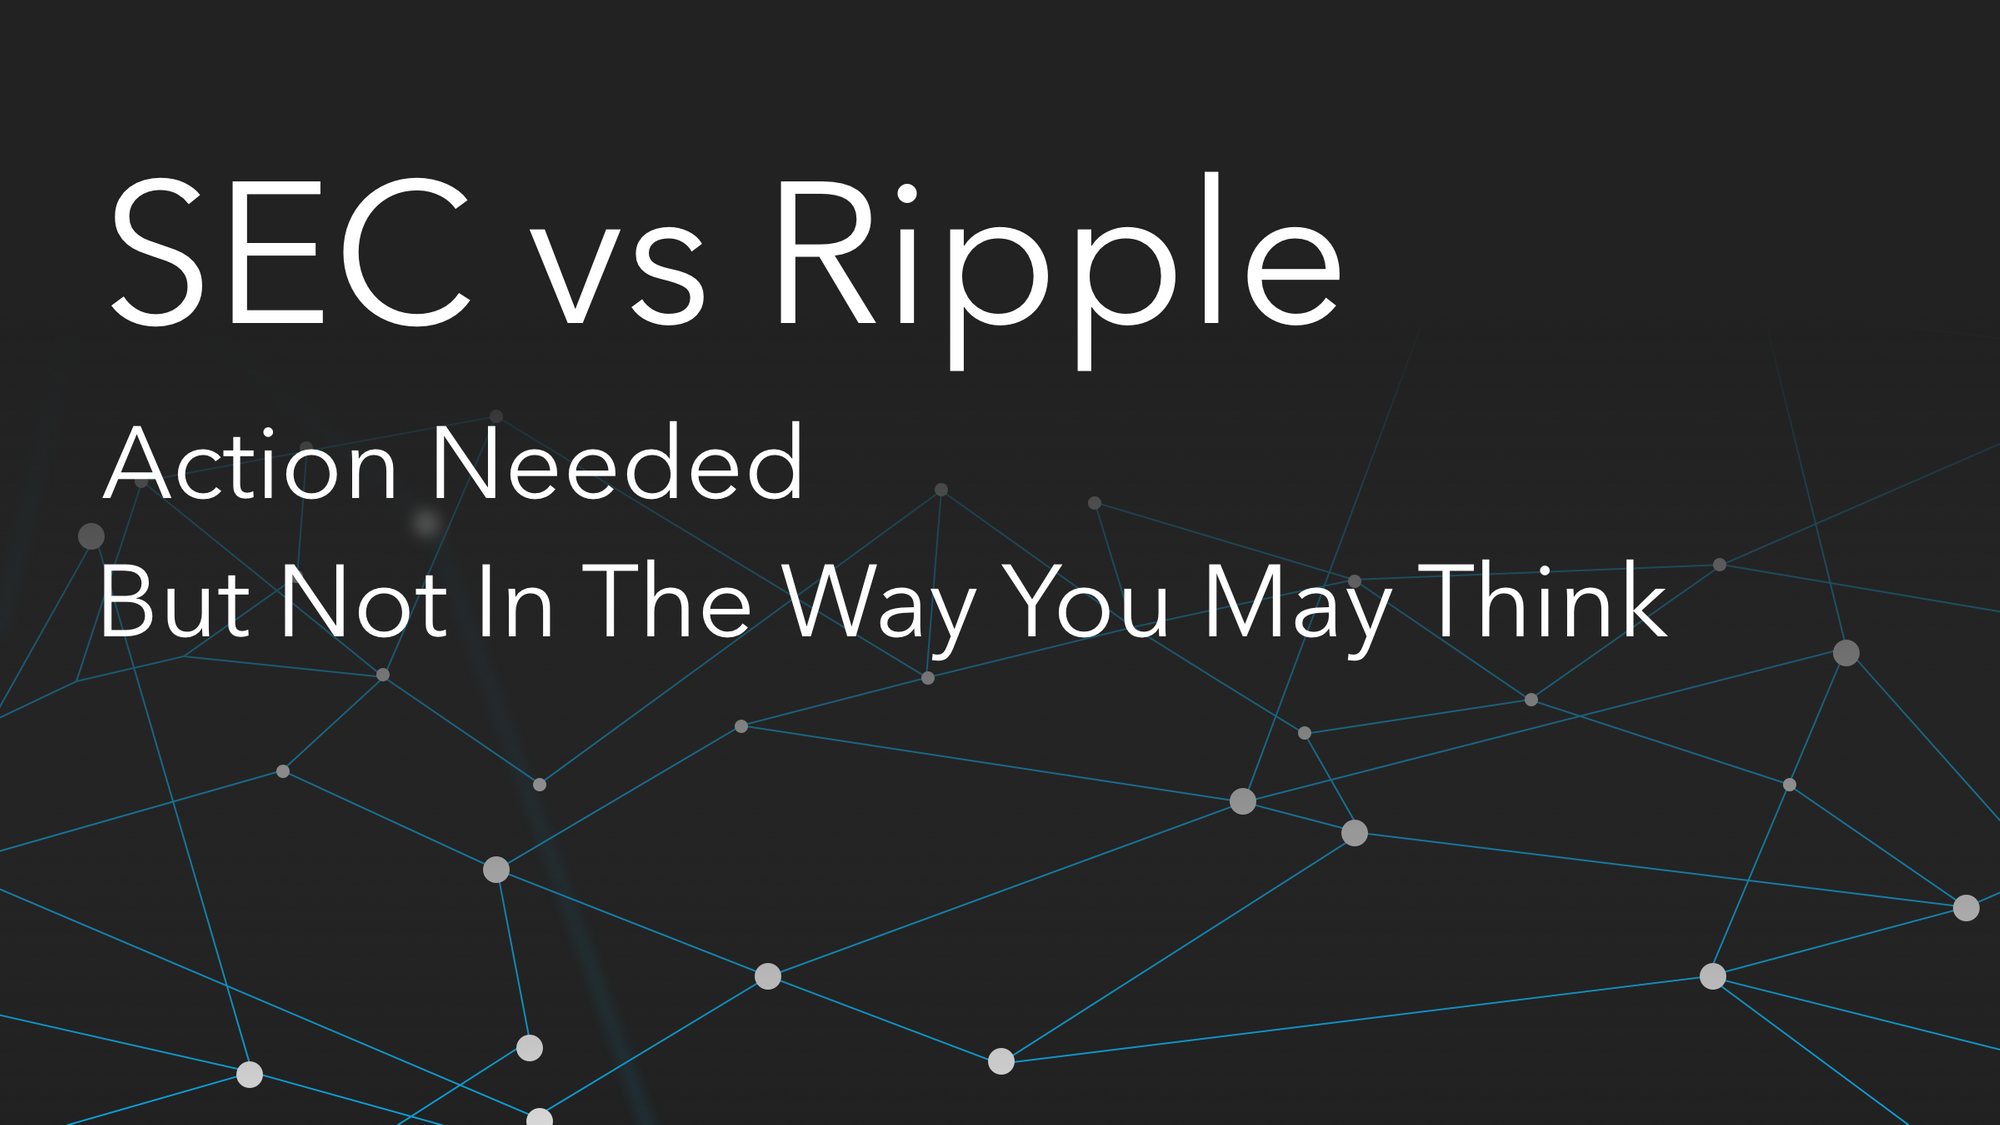 SEC vs. Ripple: Action Needed — But Not In The Way You May Think